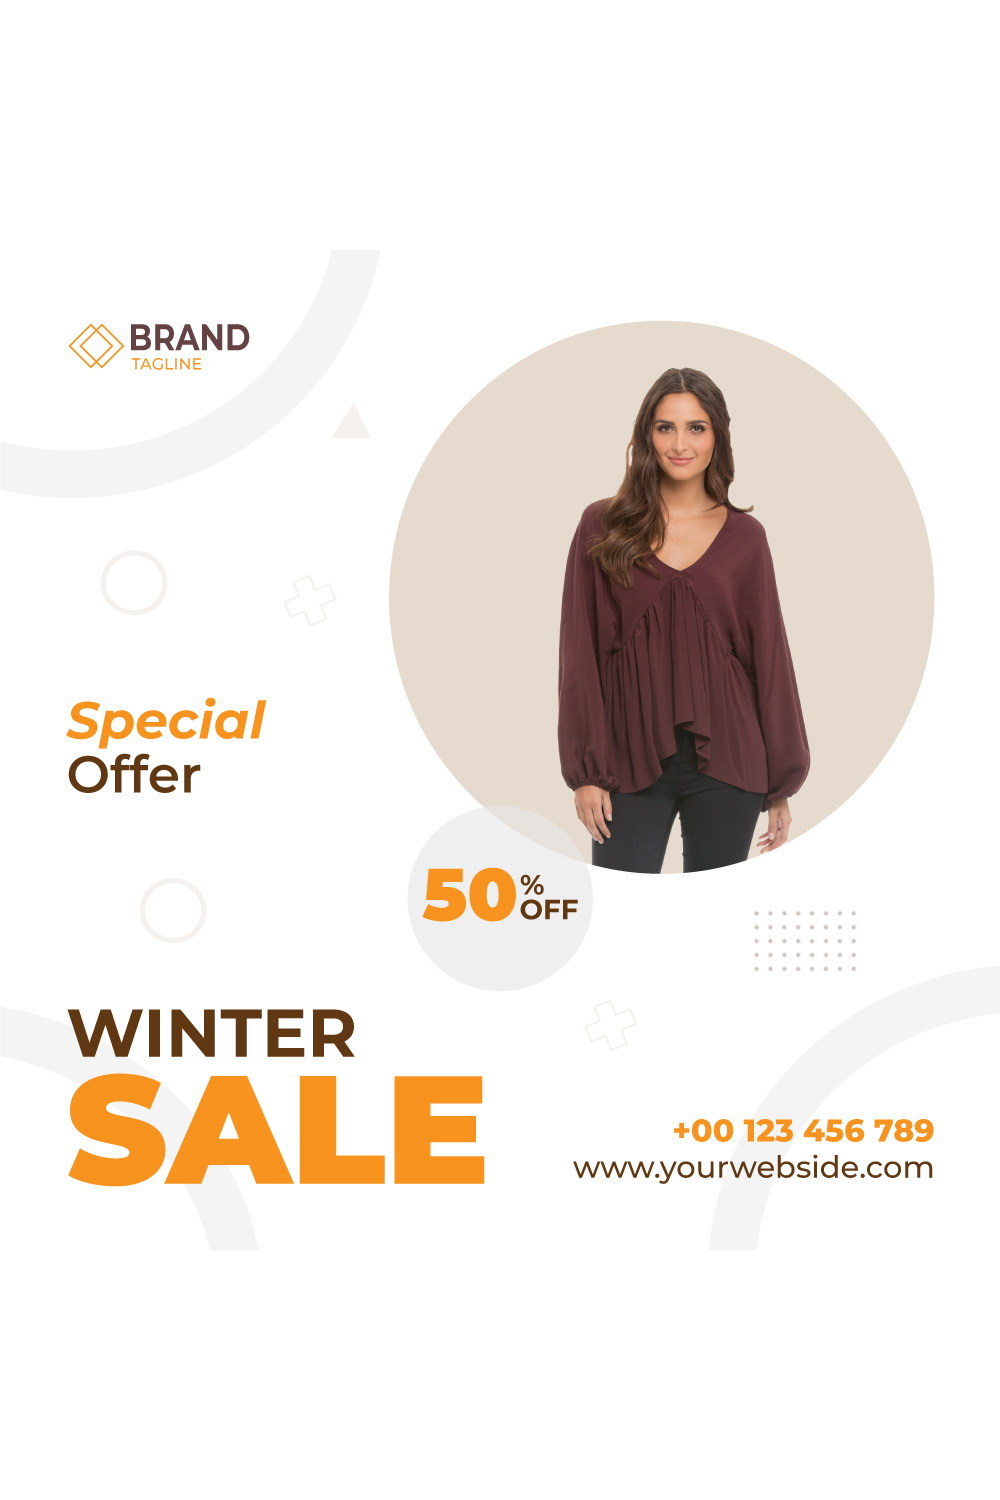 Winter Sell social media post template pinterest preview image.